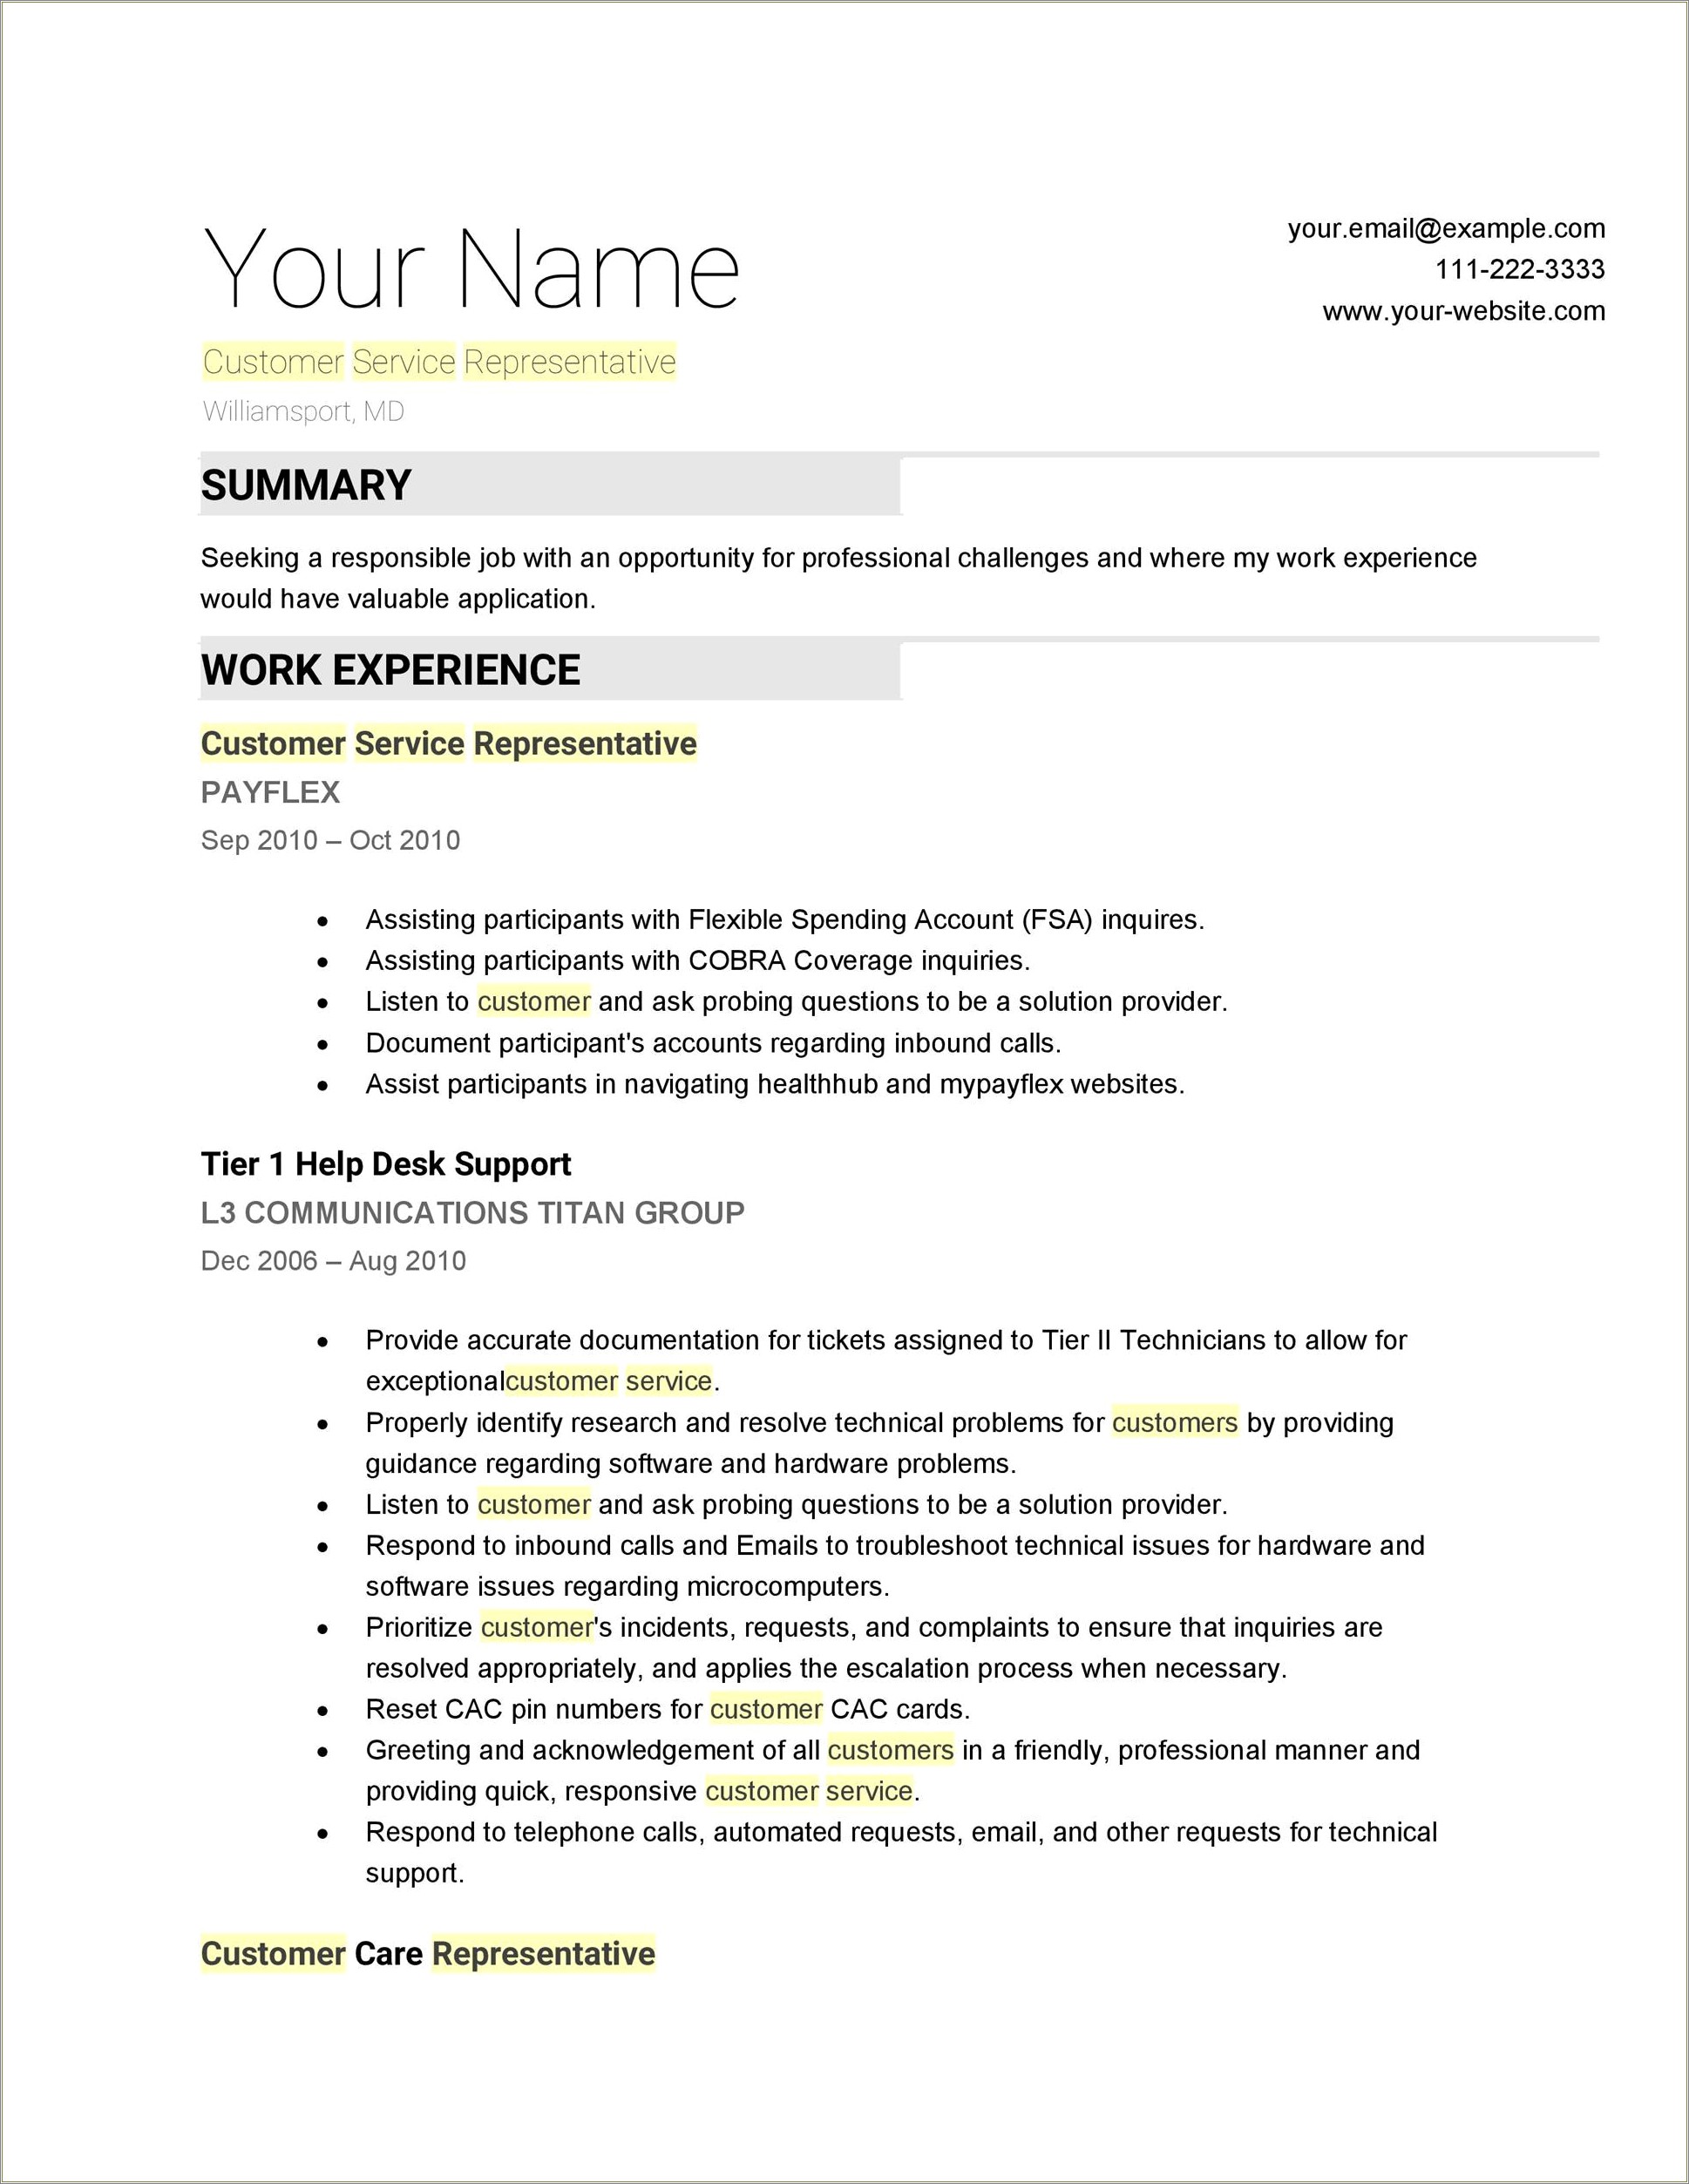 Resume Writing For Customer Service Jobs